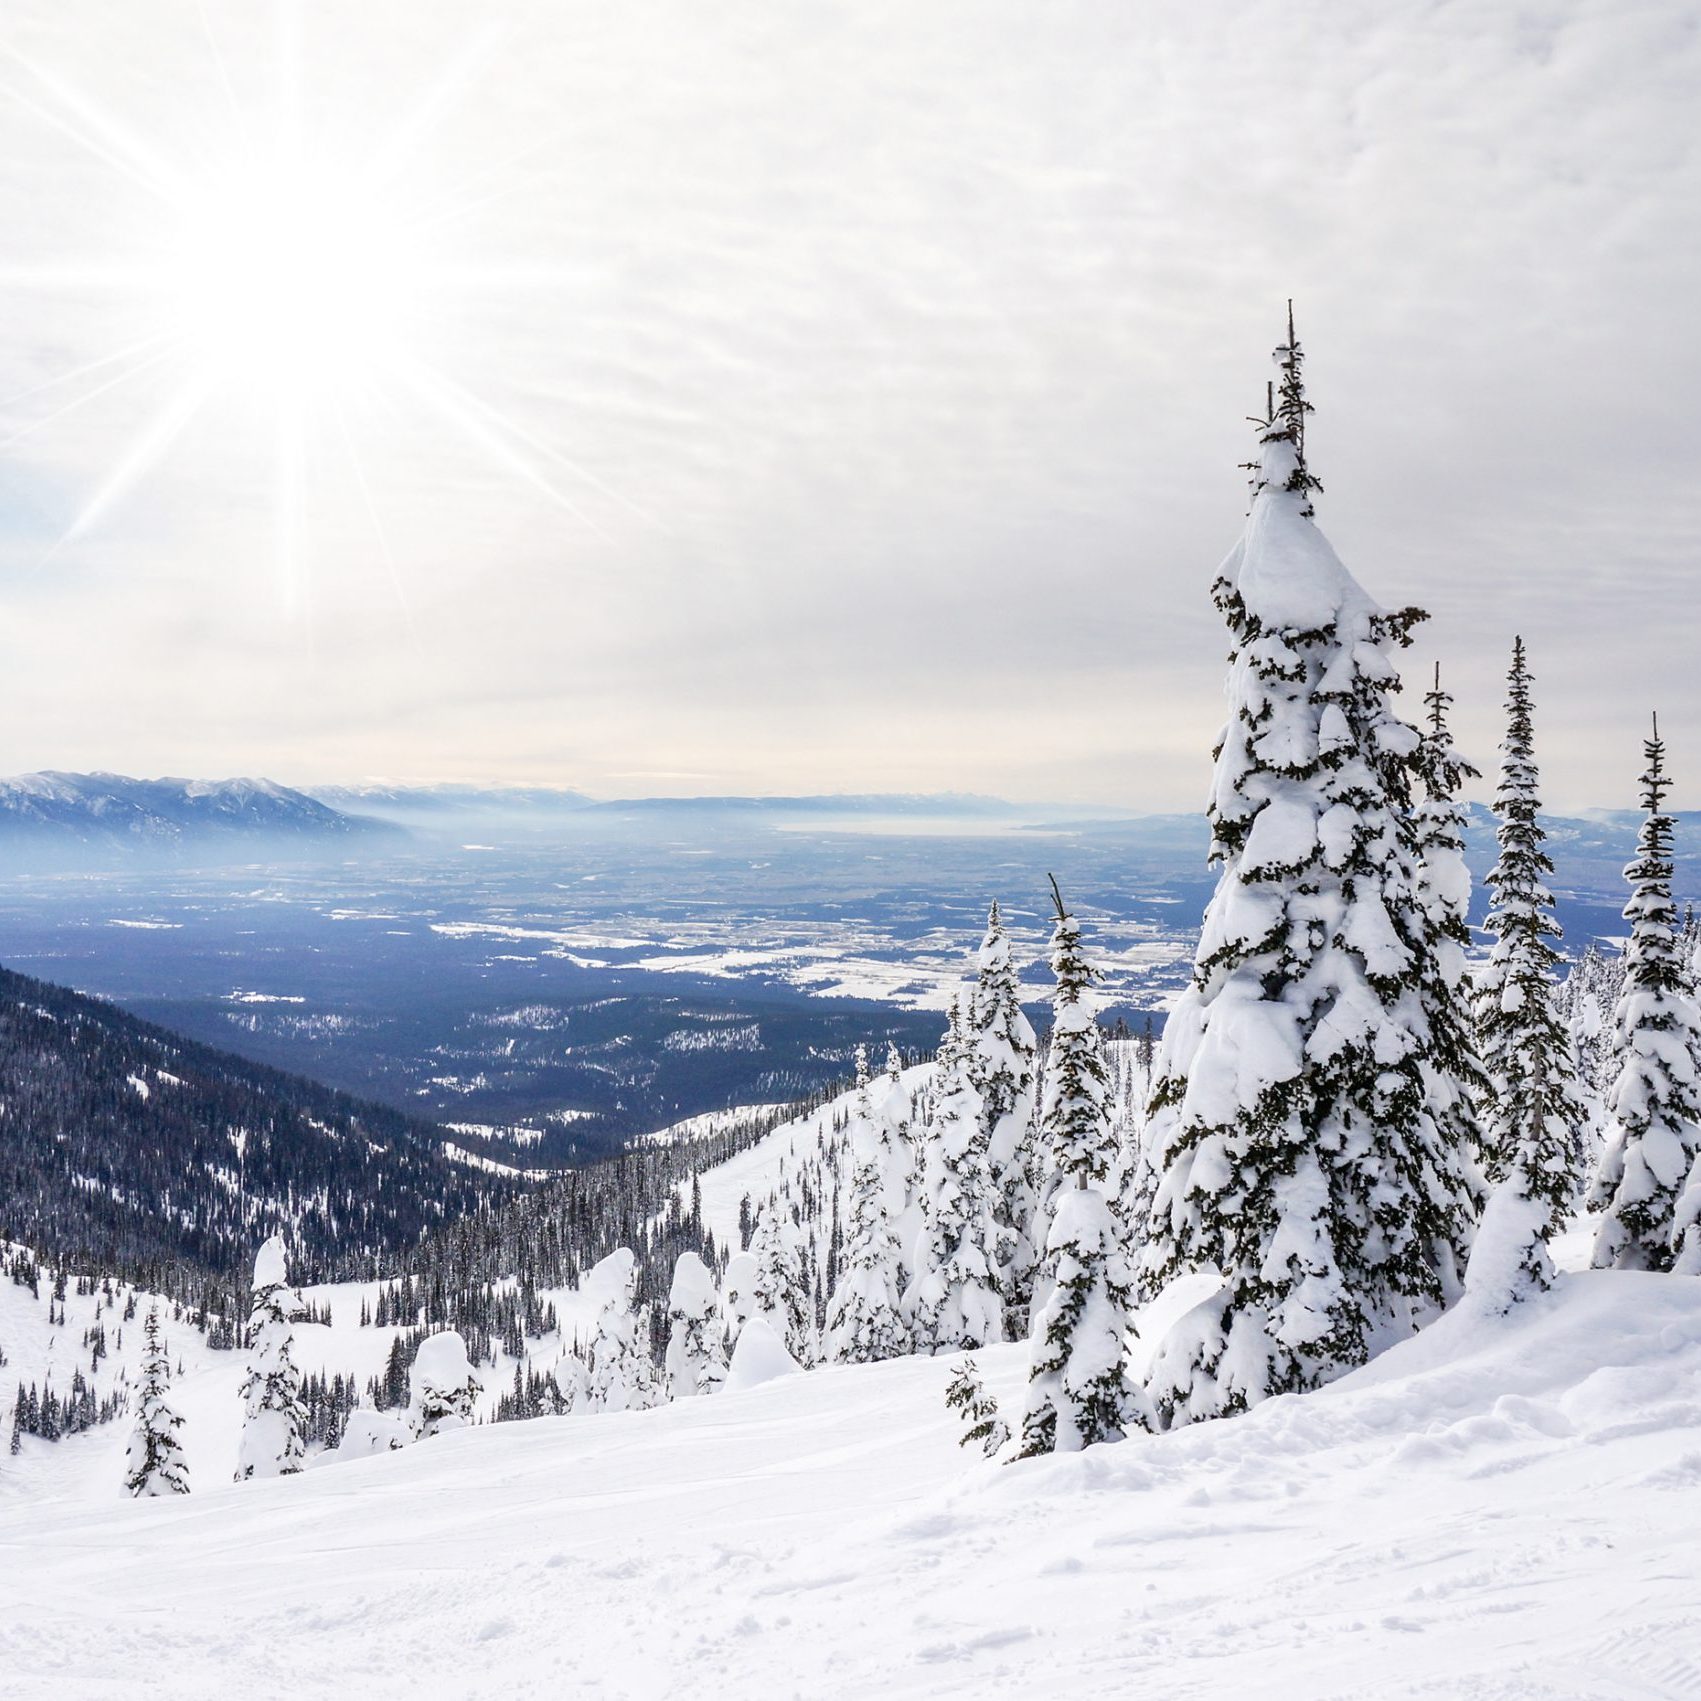 White winter landscape against the sun with fluffy clouds in Whitefish, Montana, overlooking Glacier National Park.